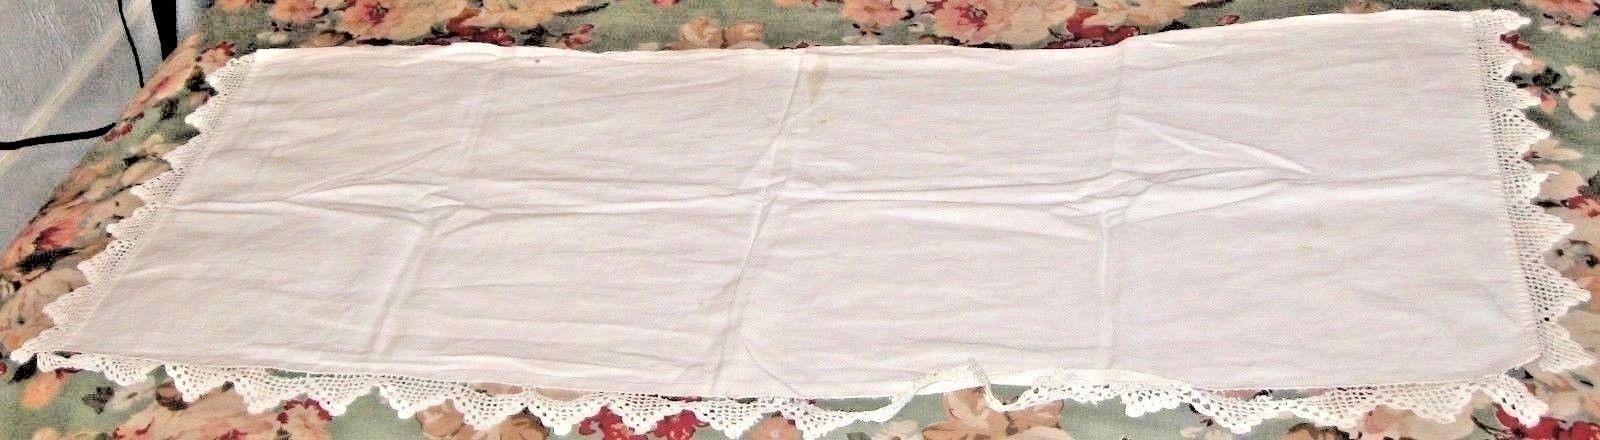 VINTAGE TABLE RUNNER CENTERPIECE WHITE COTTON HAND CROCHETED LACE EDGE 17